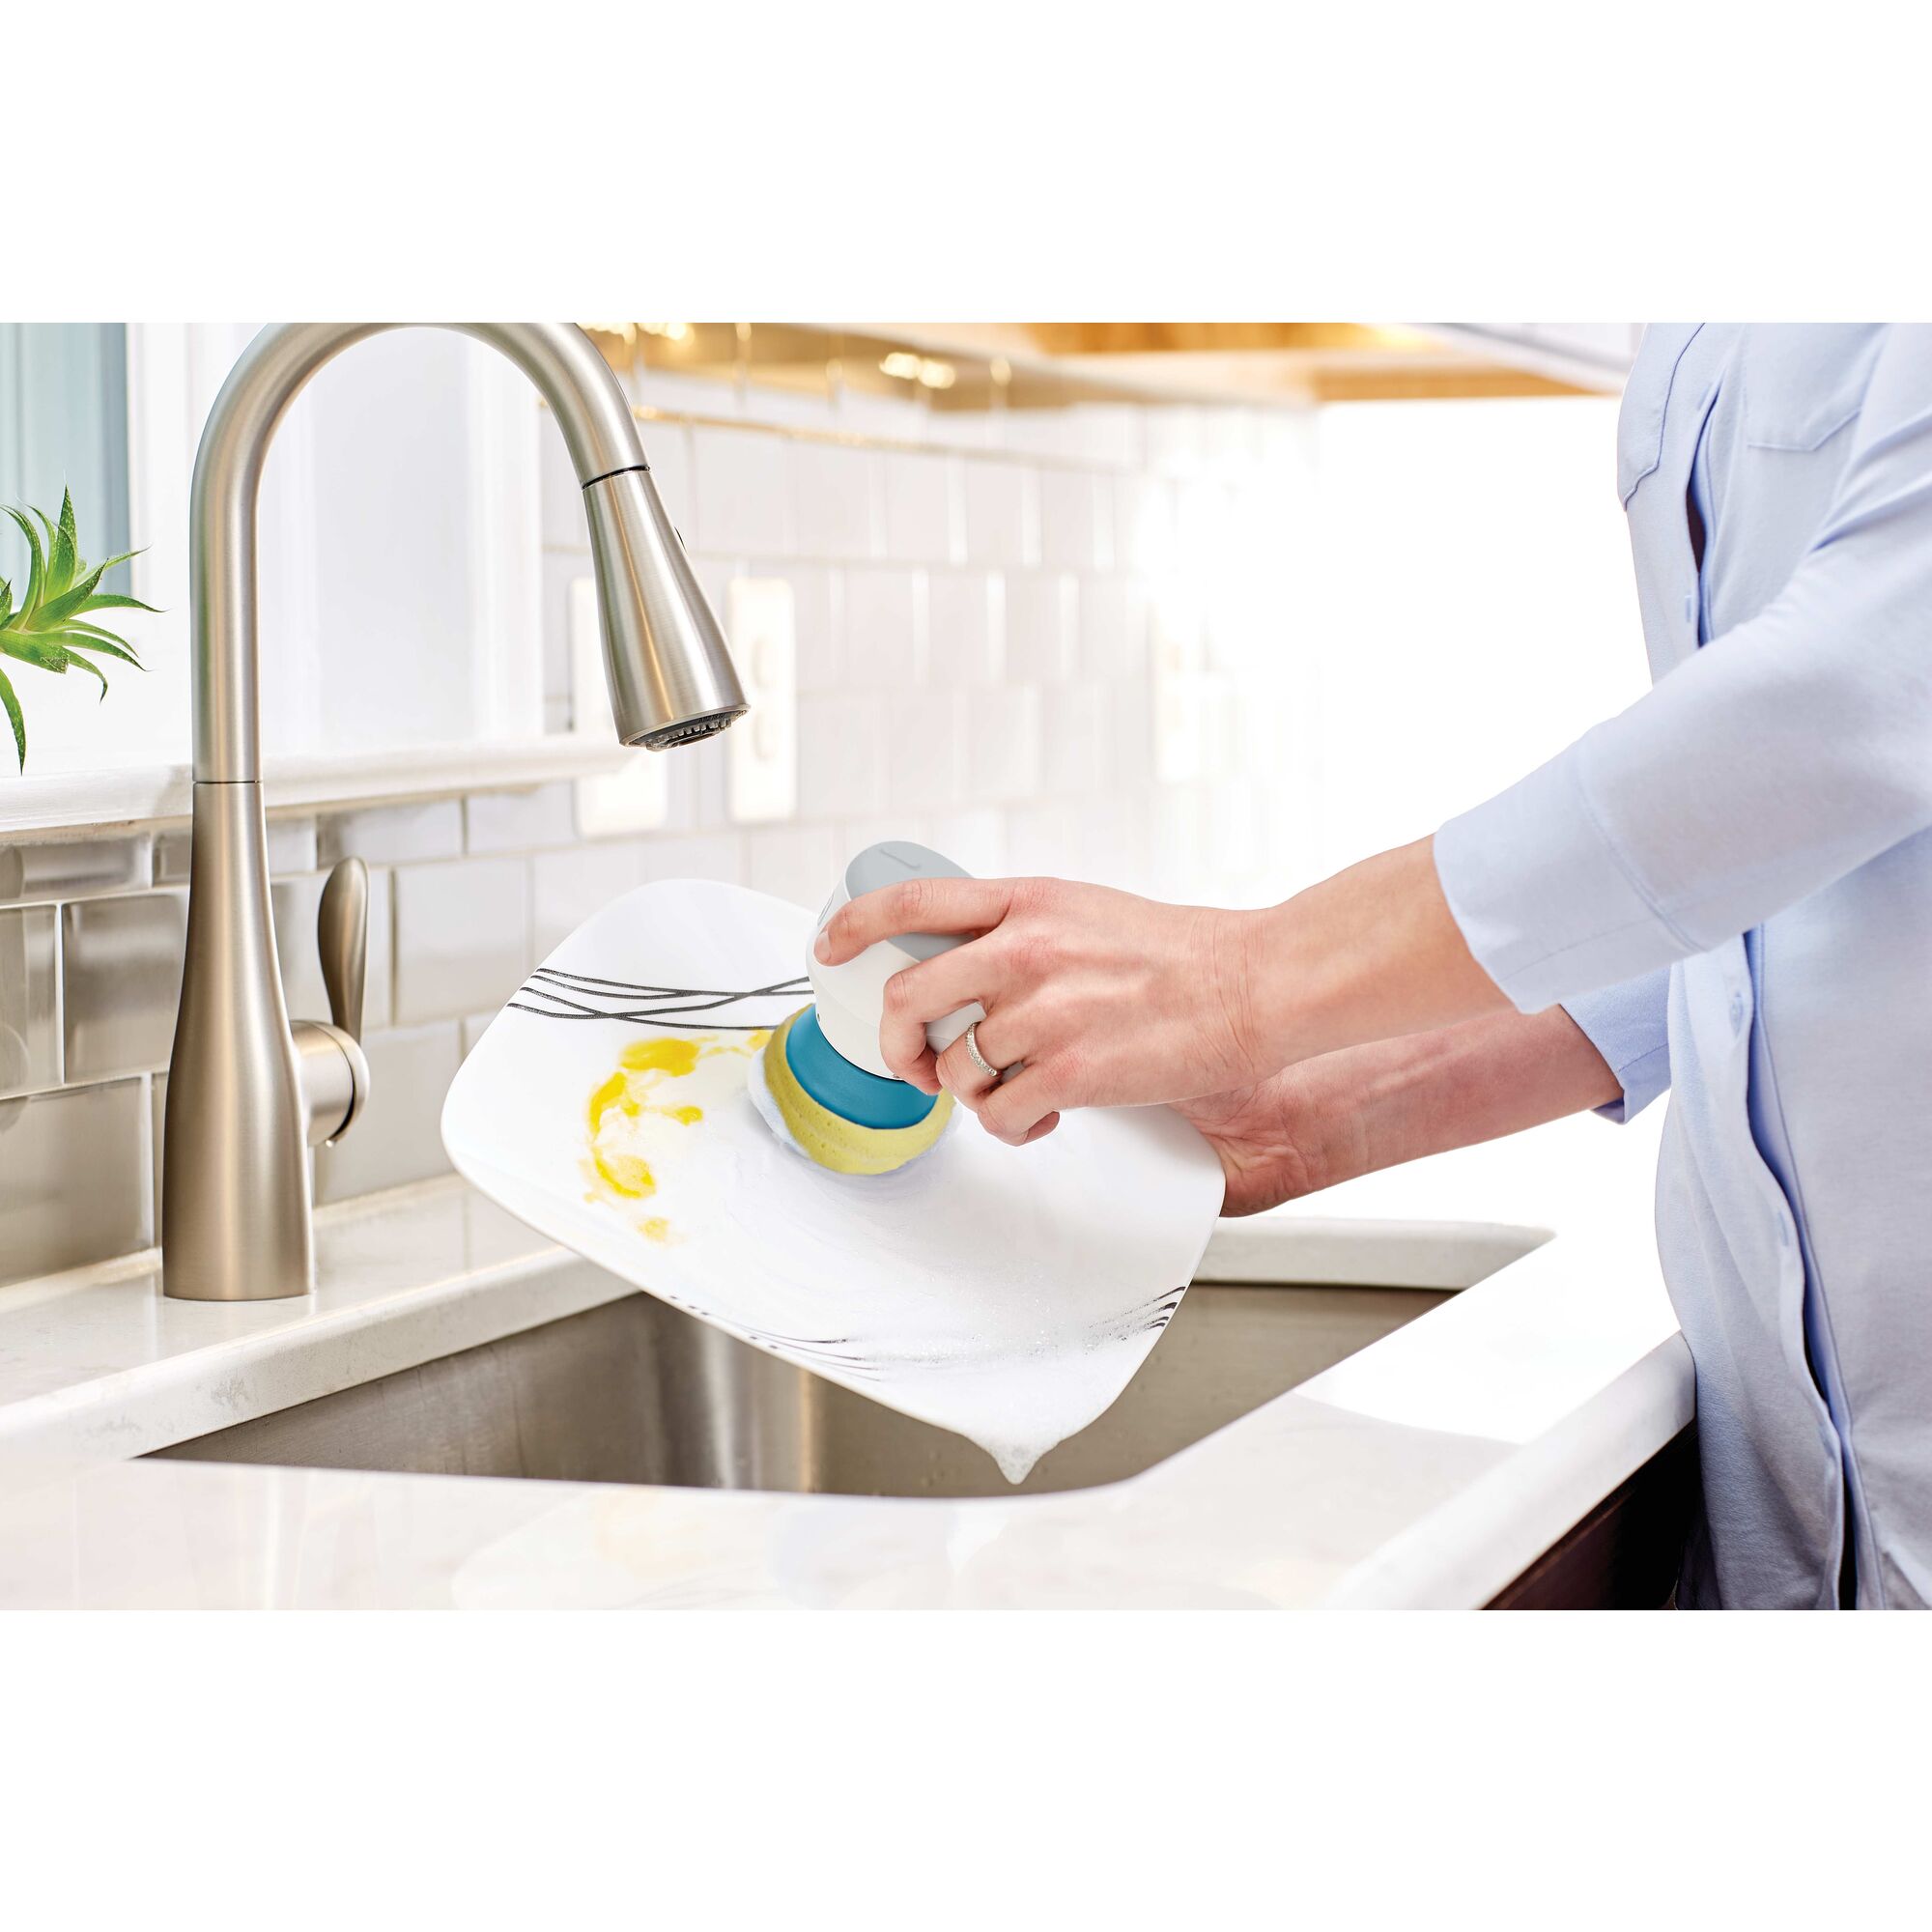 Grimebuster Powered Scrubber being used for washing dishes.